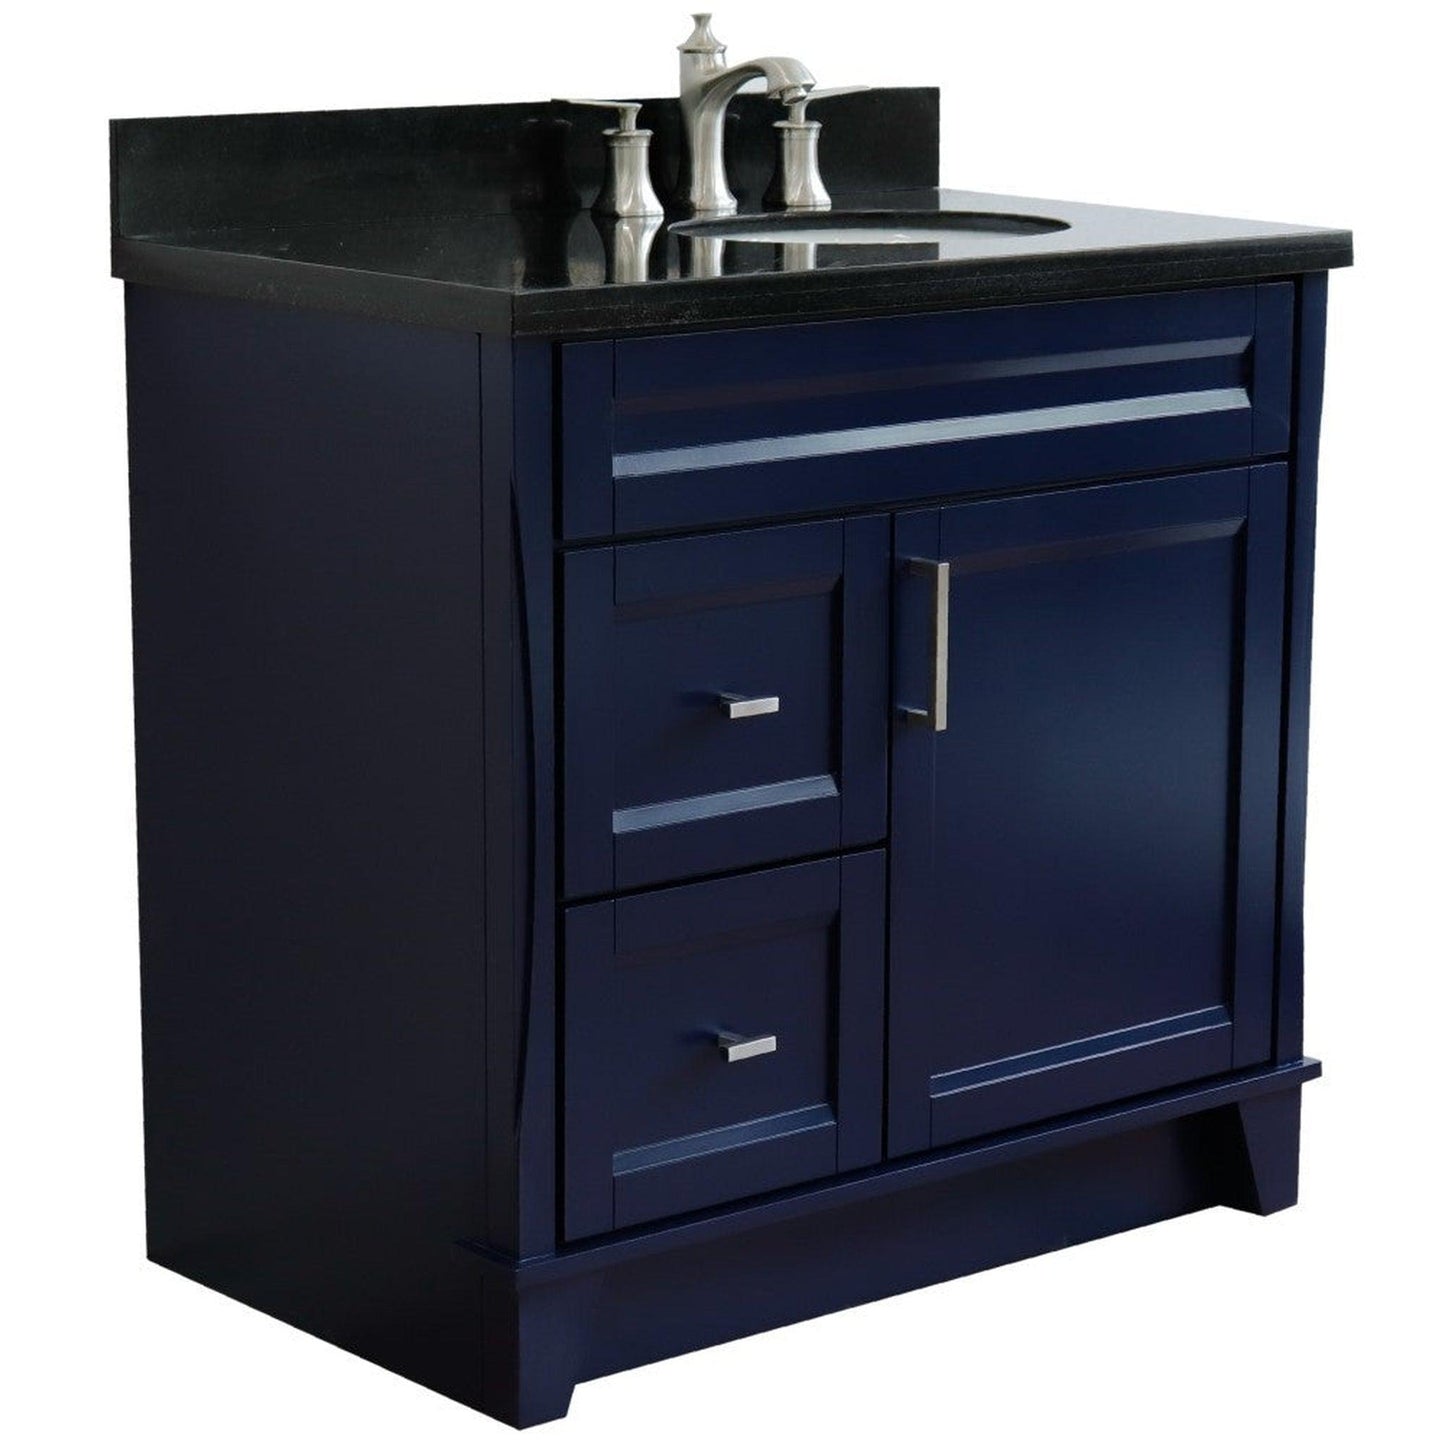 Bellaterra Home Terni 37" 1-Door 2-Drawer Blue Freestanding Vanity Set With Ceramic Right Offset Undermount Oval Sink and Black Galaxy Granite Top, and Right Door Base